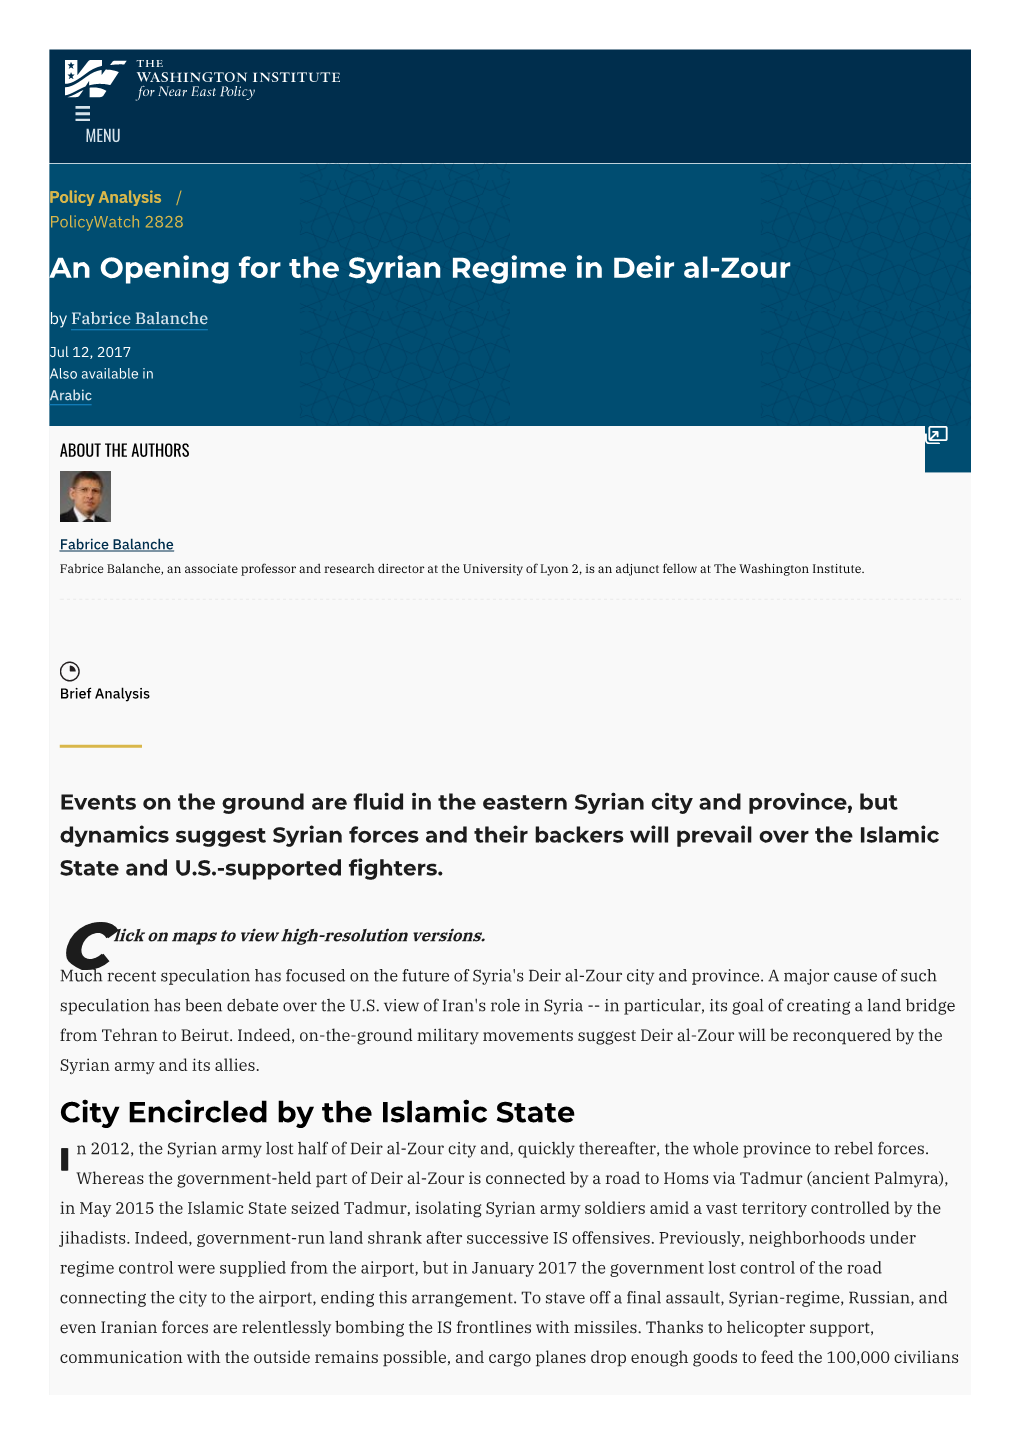 An Opening for the Syrian Regime in Deir Al-Zour by Fabrice Balanche